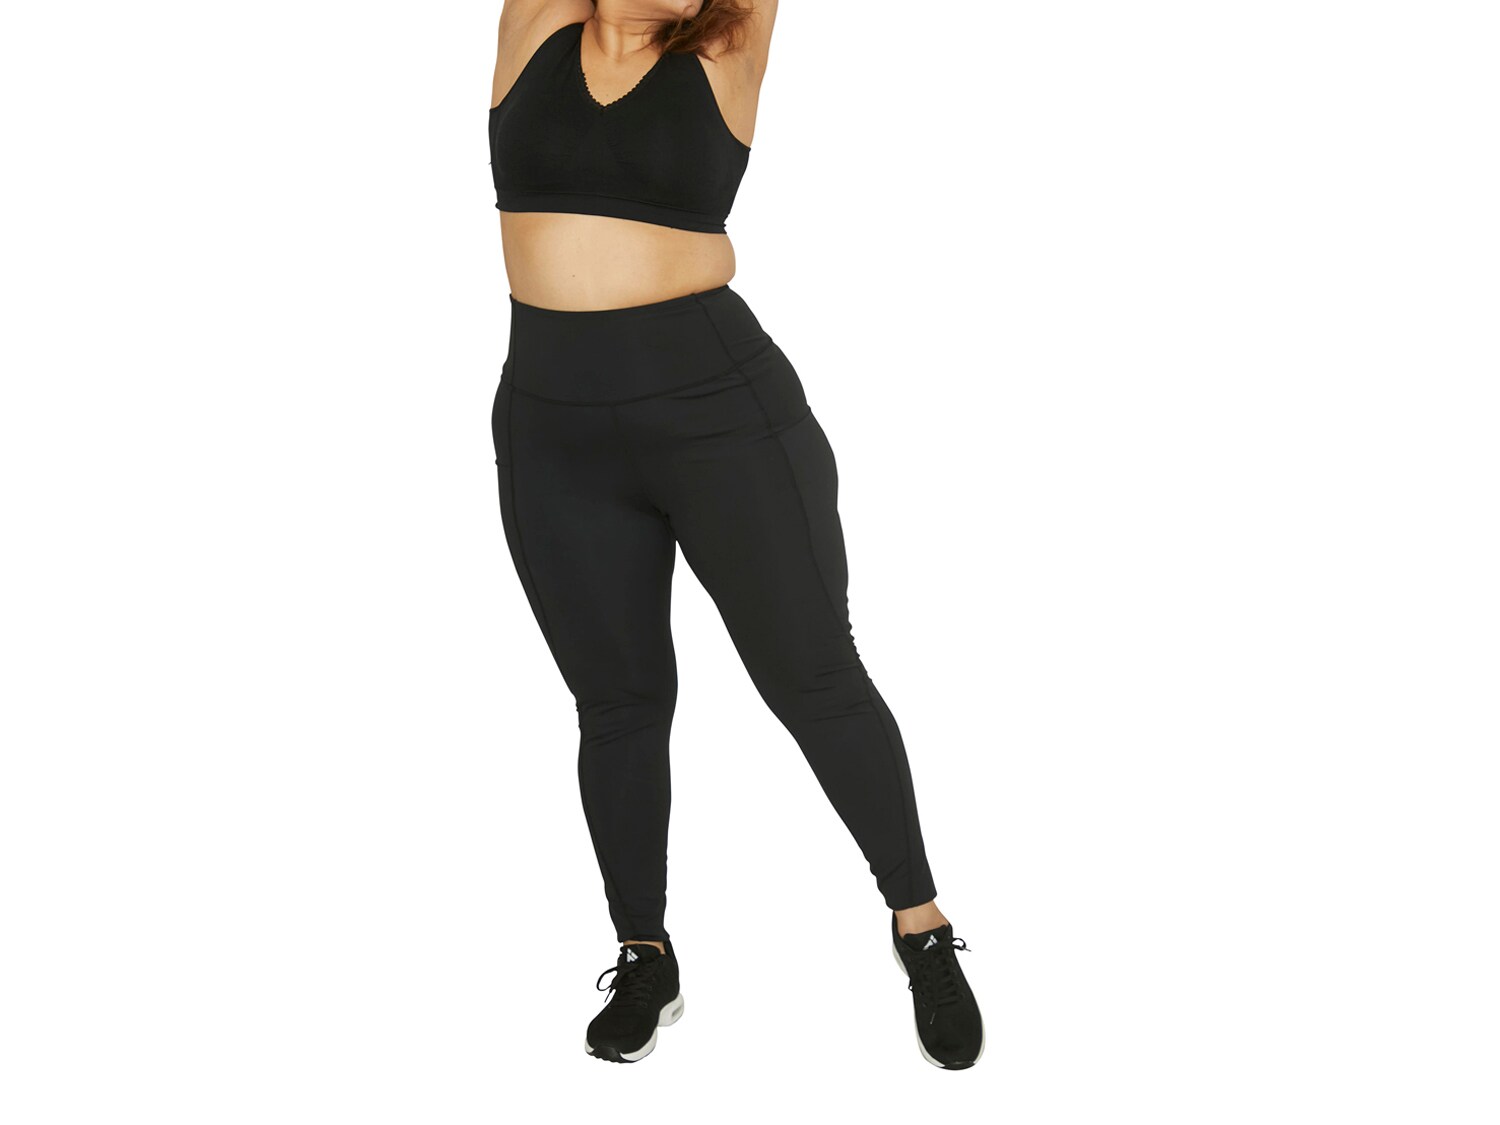 Tummy control Seamless High - waist leggings without velvet – X-DOE COUTURE